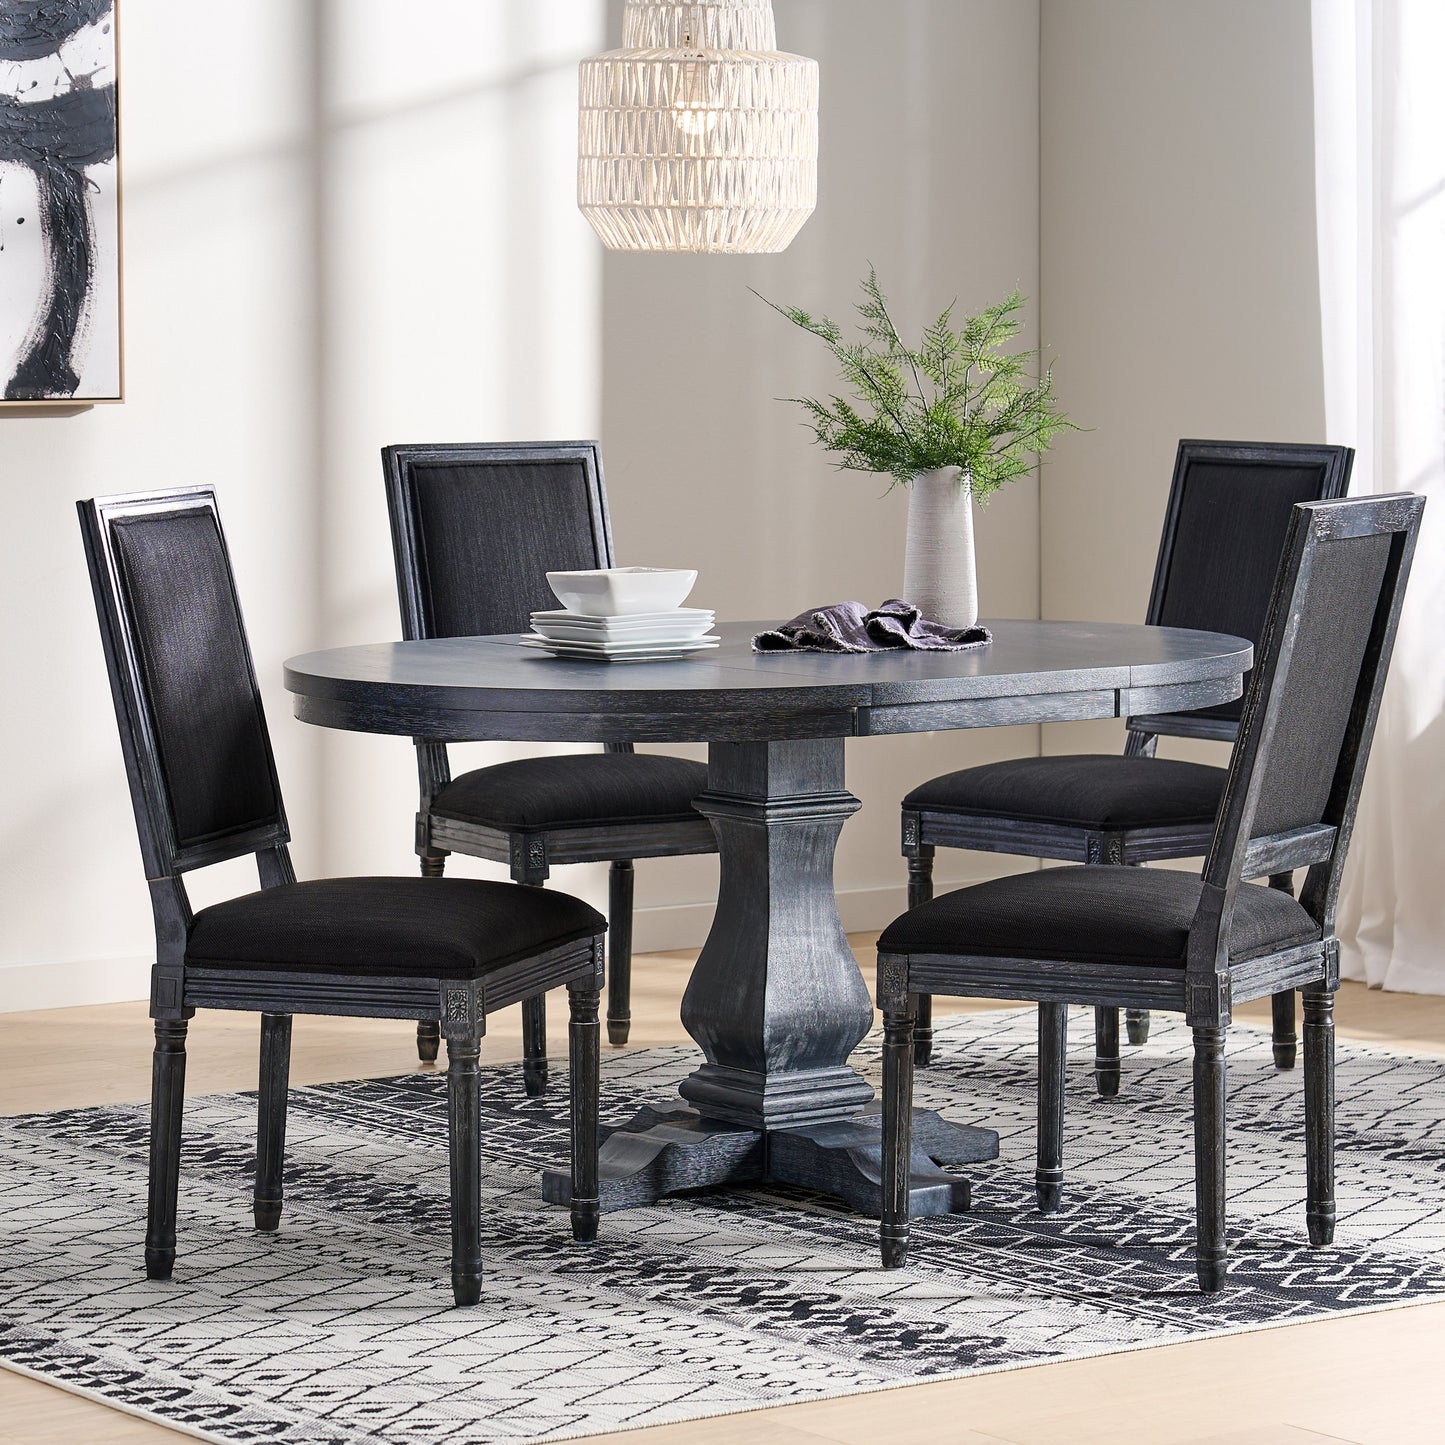 Beckstrom French Country 5-Piece Expandable Oval Dining Set - Wood